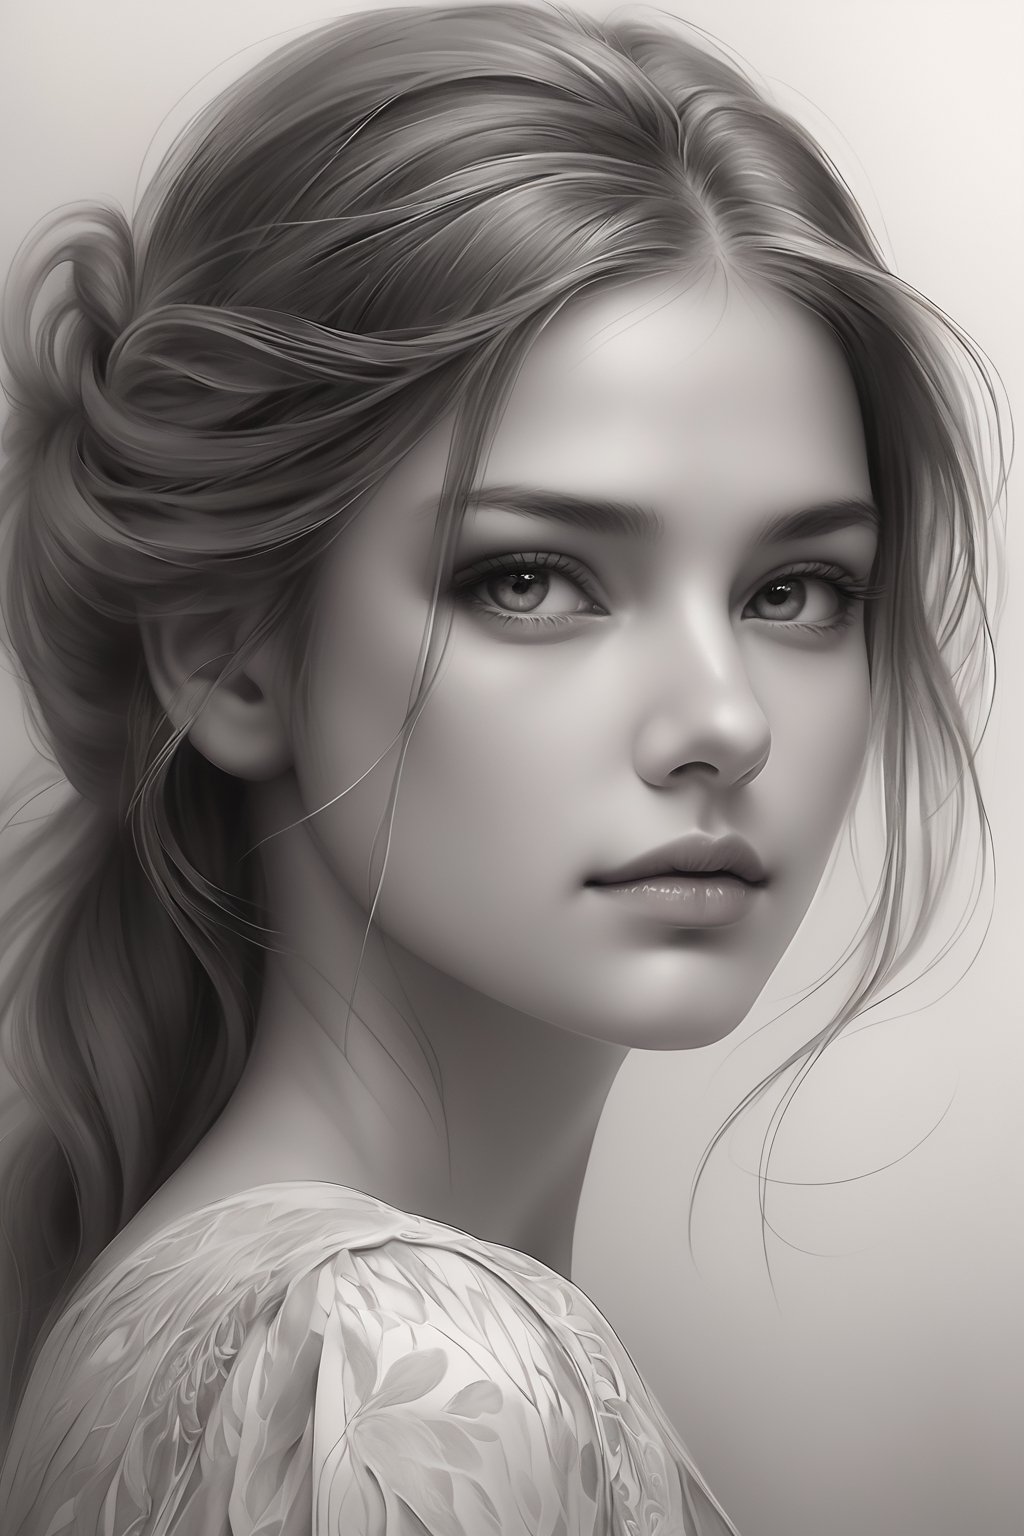 A beautifully rendered pencil art portrait of a woman with a captivating gaze. The illustration showcases her delicate facial features, with soft shading and detailing that brings the image to life. The background is a subtle blend of gray tones, drawing focus to the woman's captivating expression and the intricate strands of her hair. The overall effect is a timeless, elegant piece that captures the essence of the subject's soul.